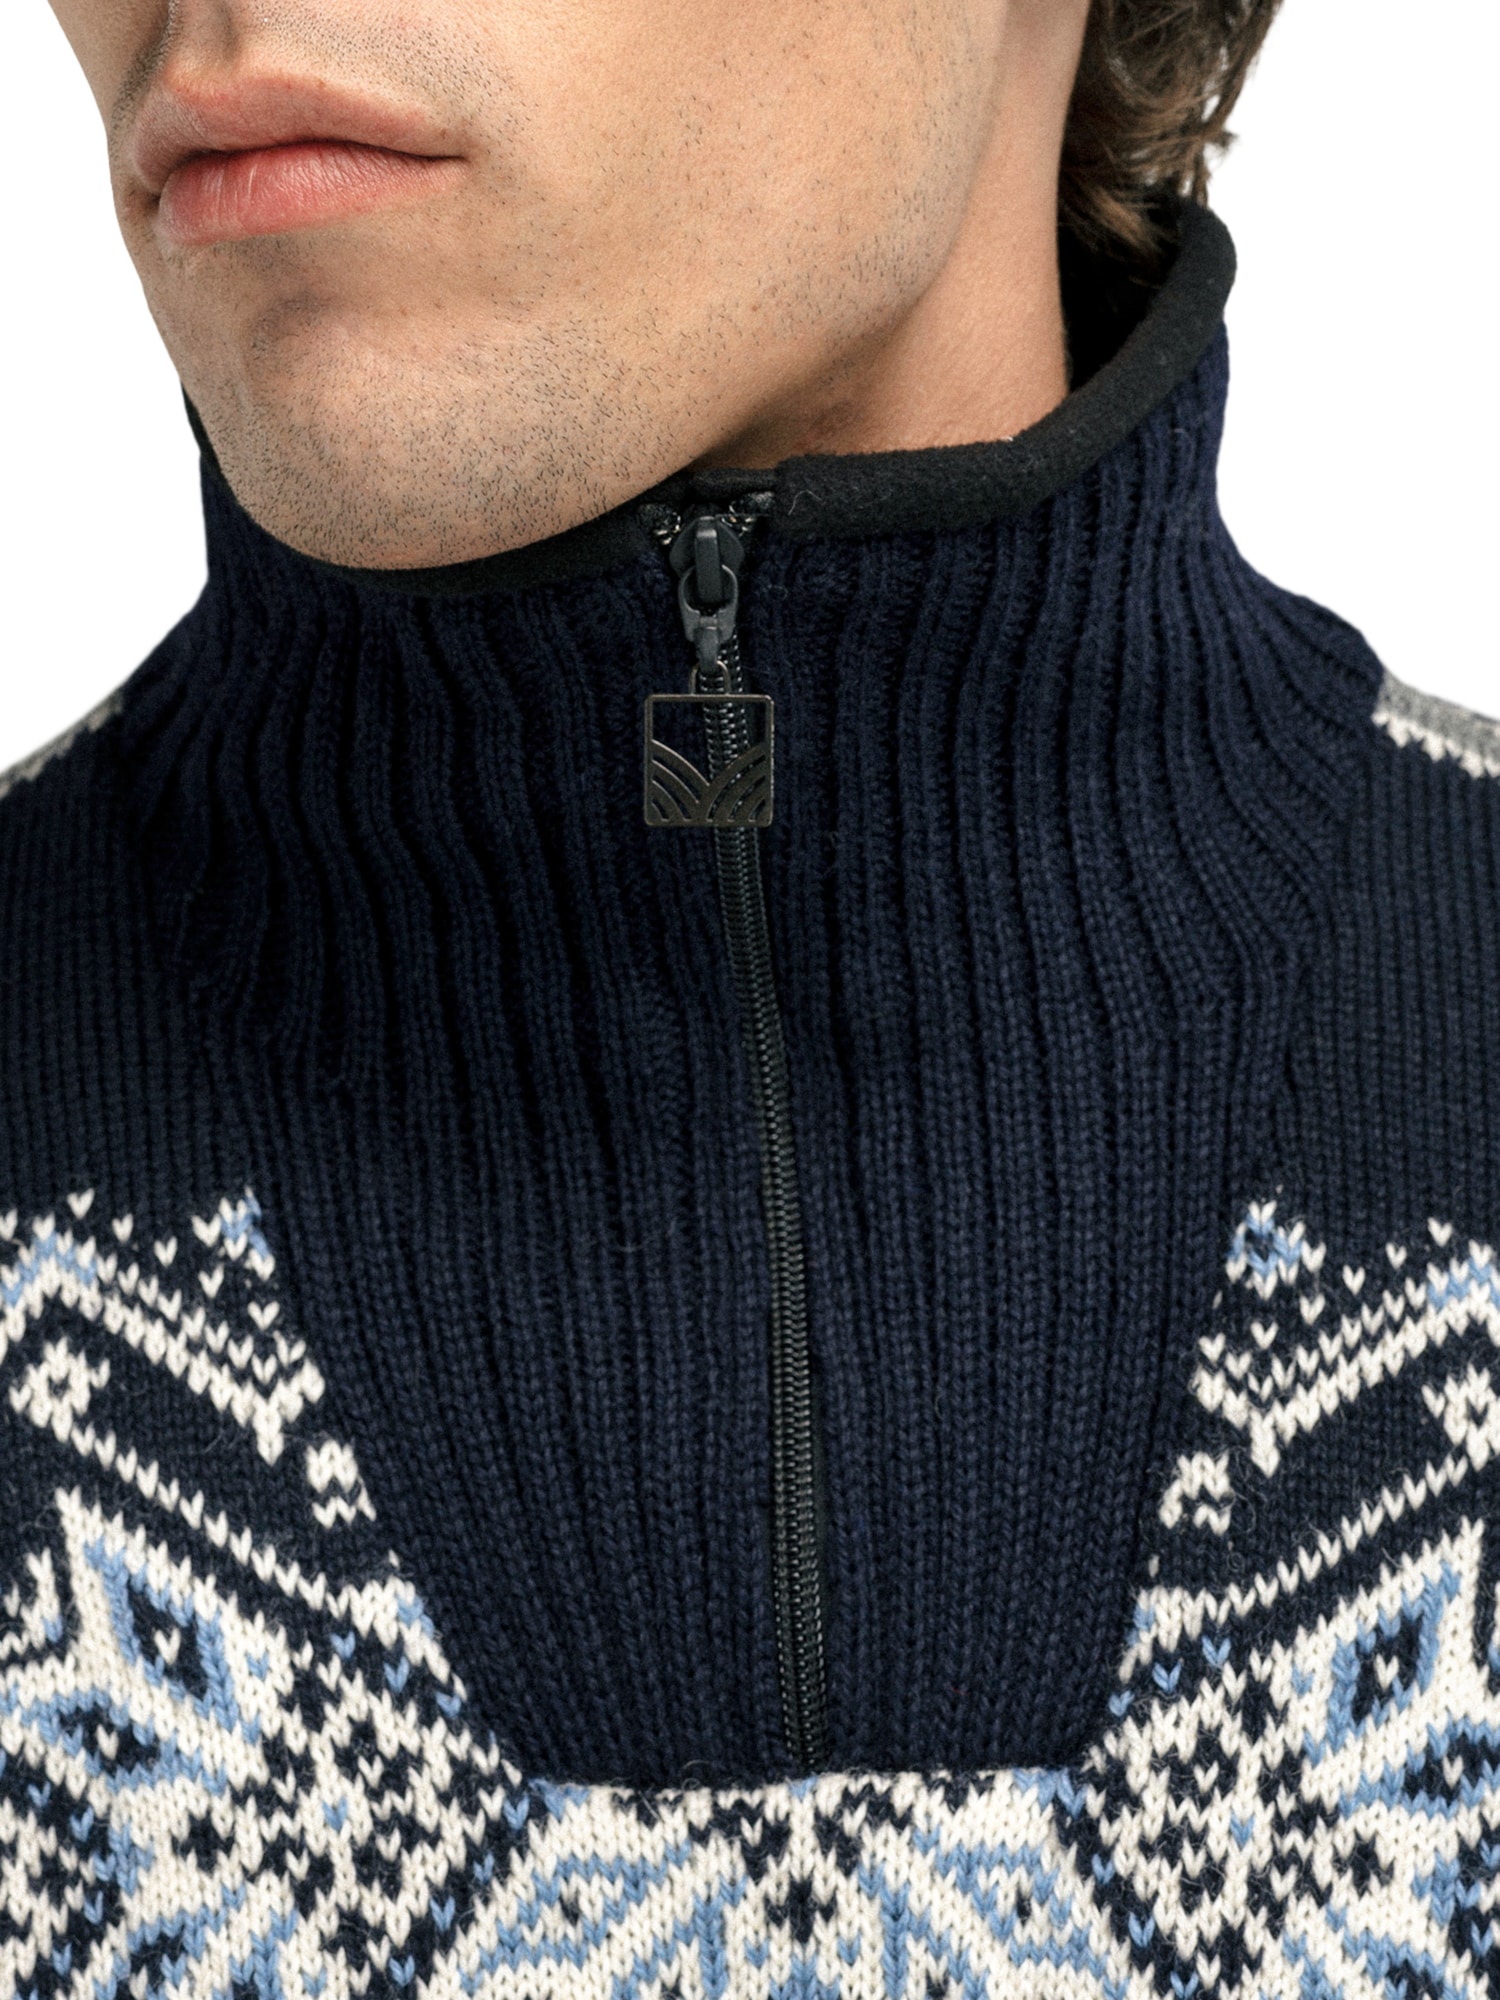 Vail Weatherproof Sweater - Men of - Dale Dale - - of Norway Offwhite Norway